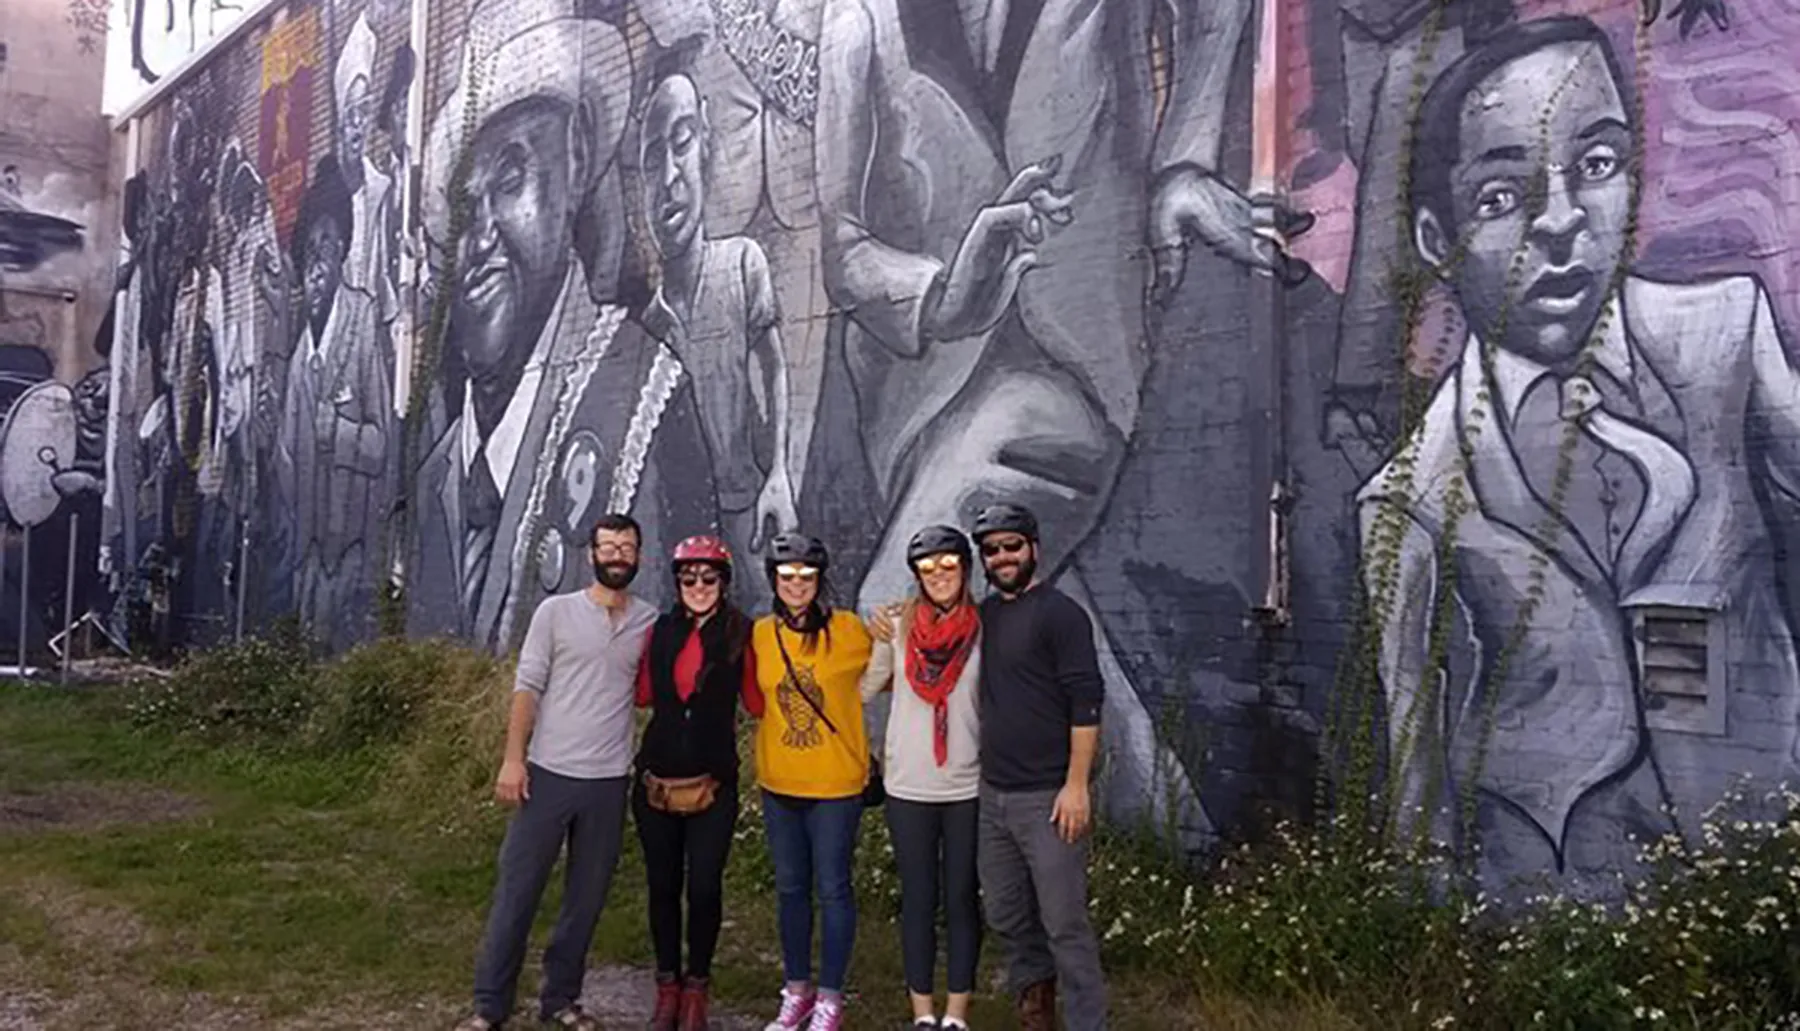 Four people wearing helmets are posing in front of a large monochromatic mural featuring jazz musicians.